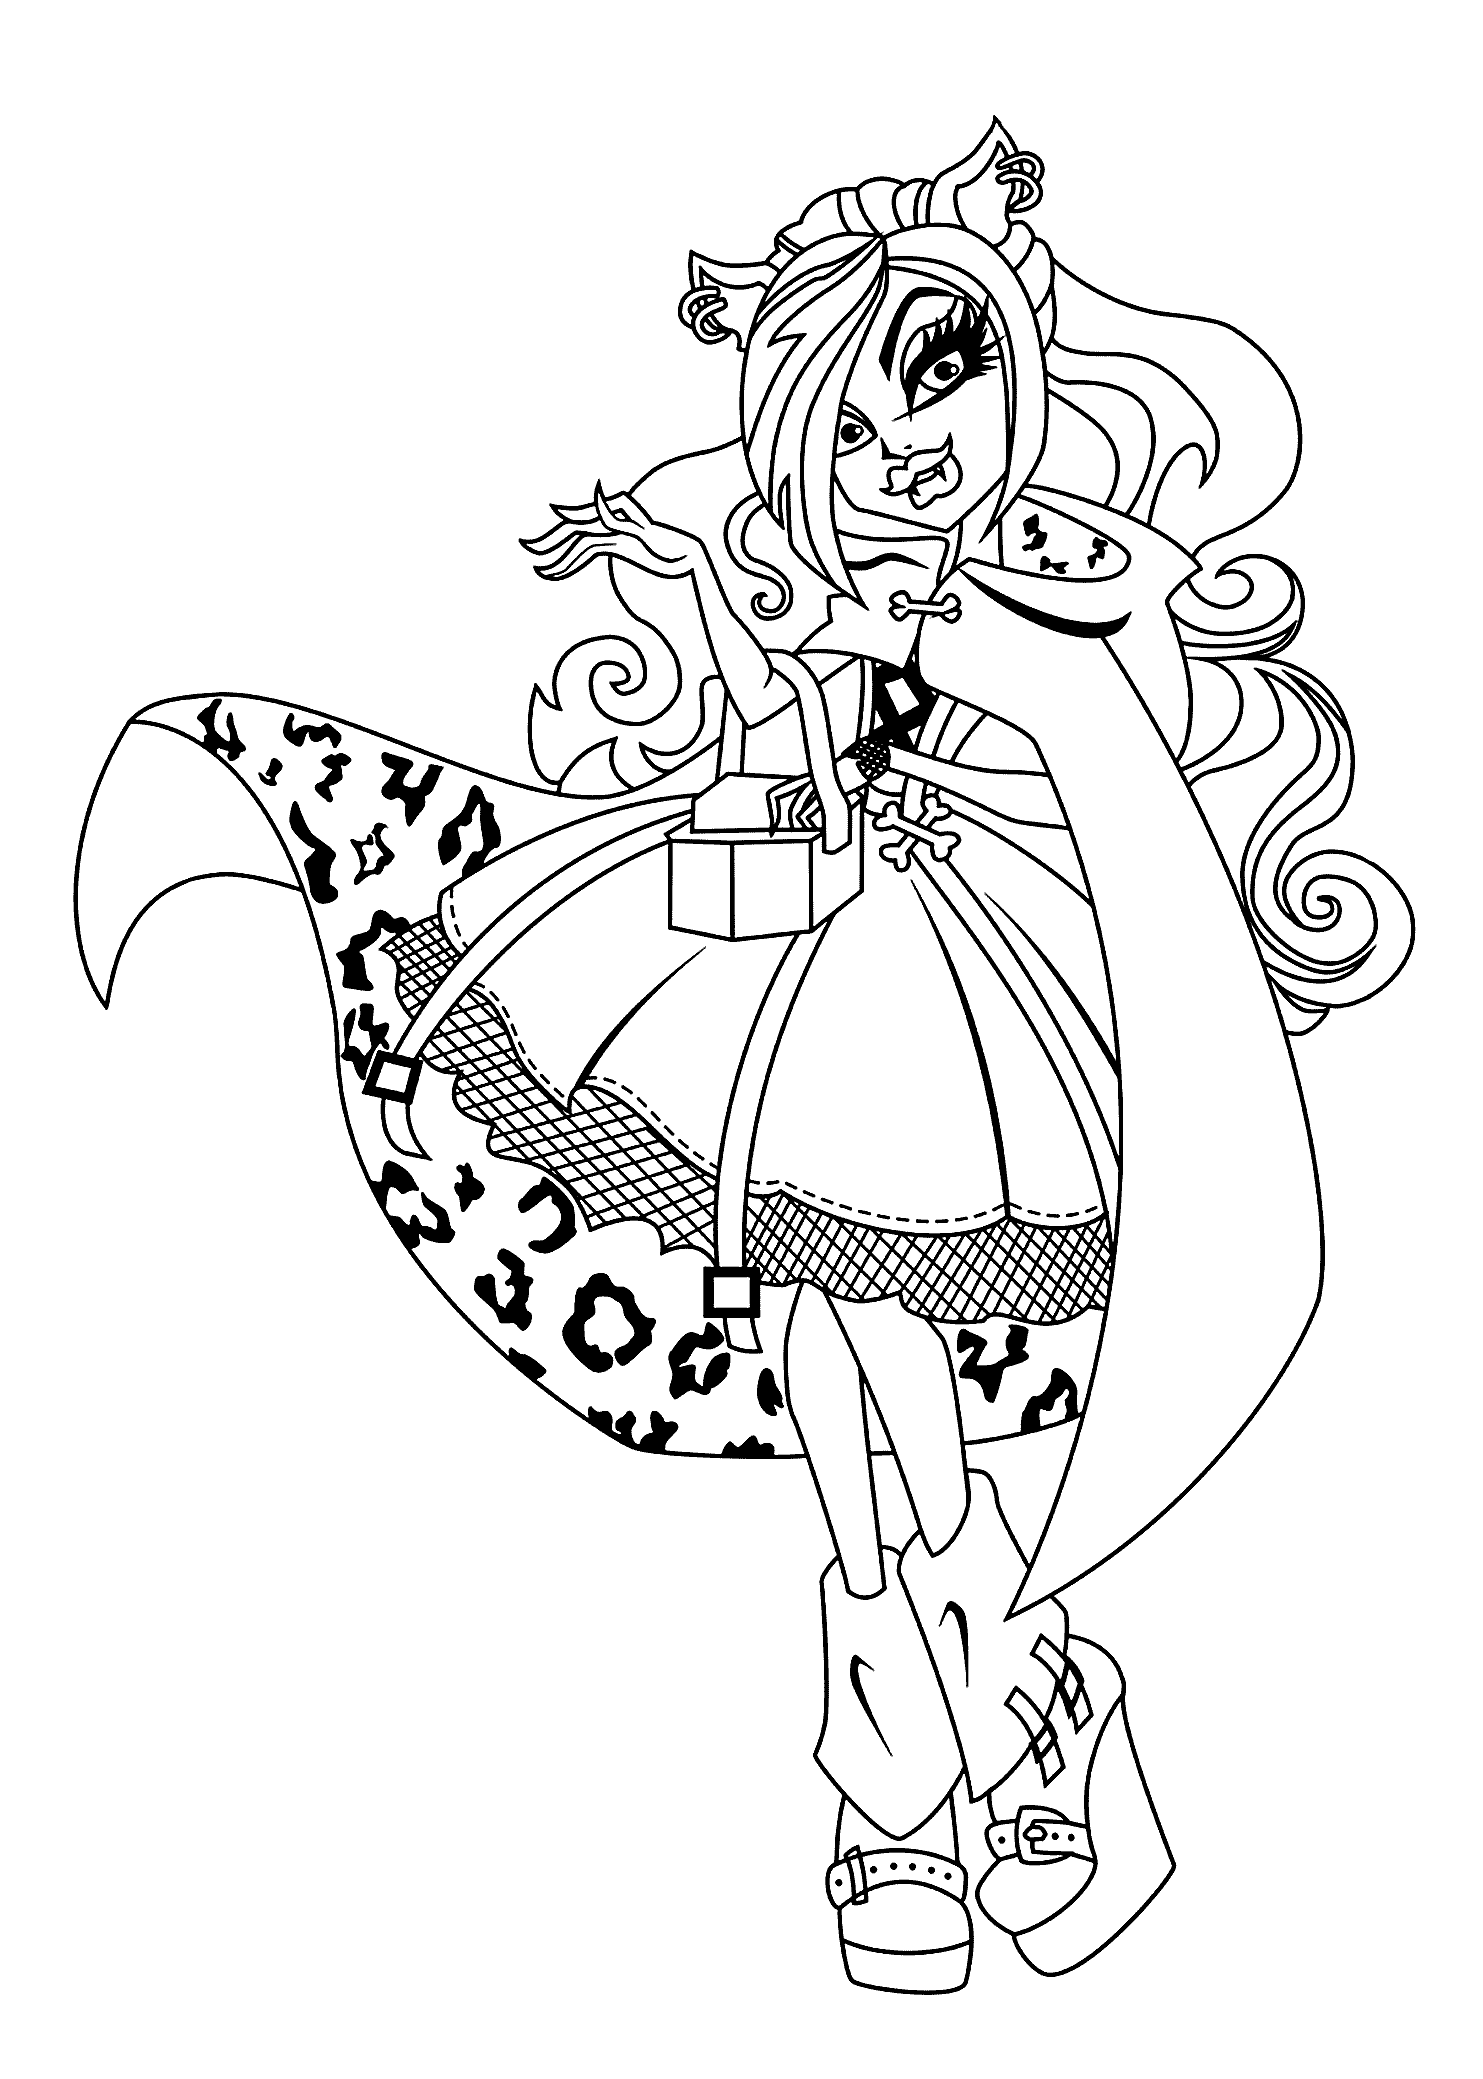 Free Printable Monster High Coloring Pages Inspiring - Coloring pages